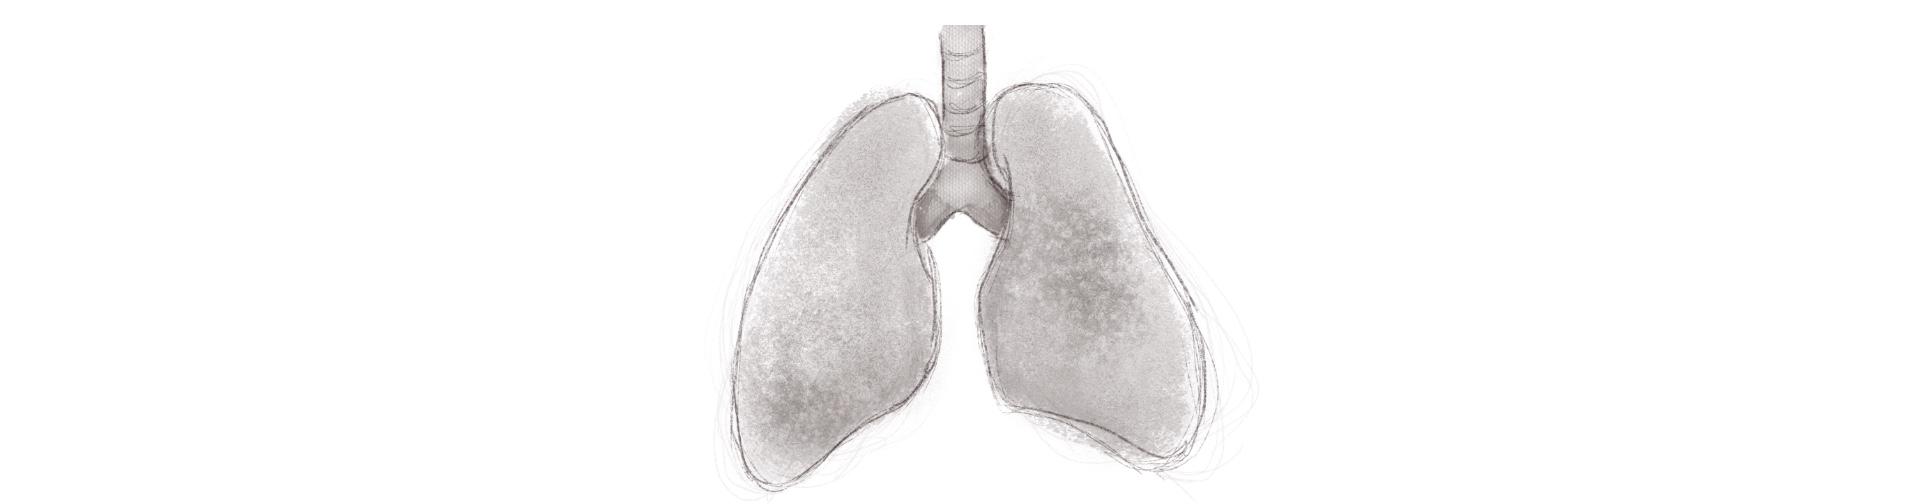 A drawing of a set of lungs in black and white by Adam Westbrook